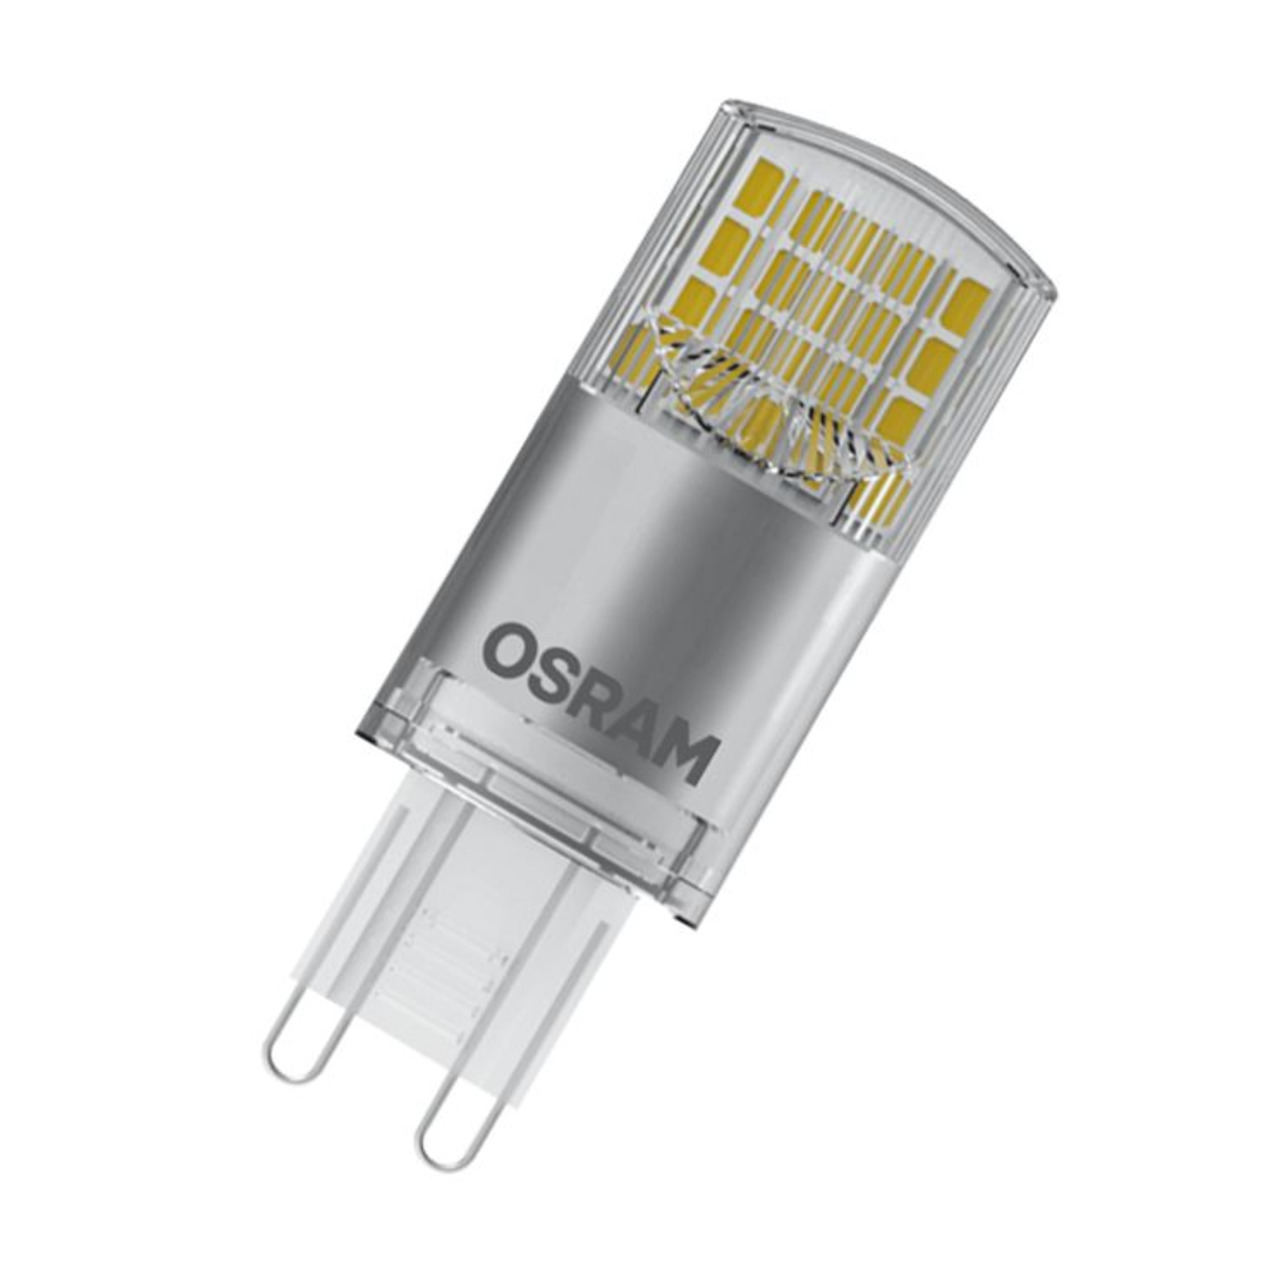 OSRAM 3-8-W-LED-Lampe T20- G9- 470 lm- warmweiss unter Beleuchtung